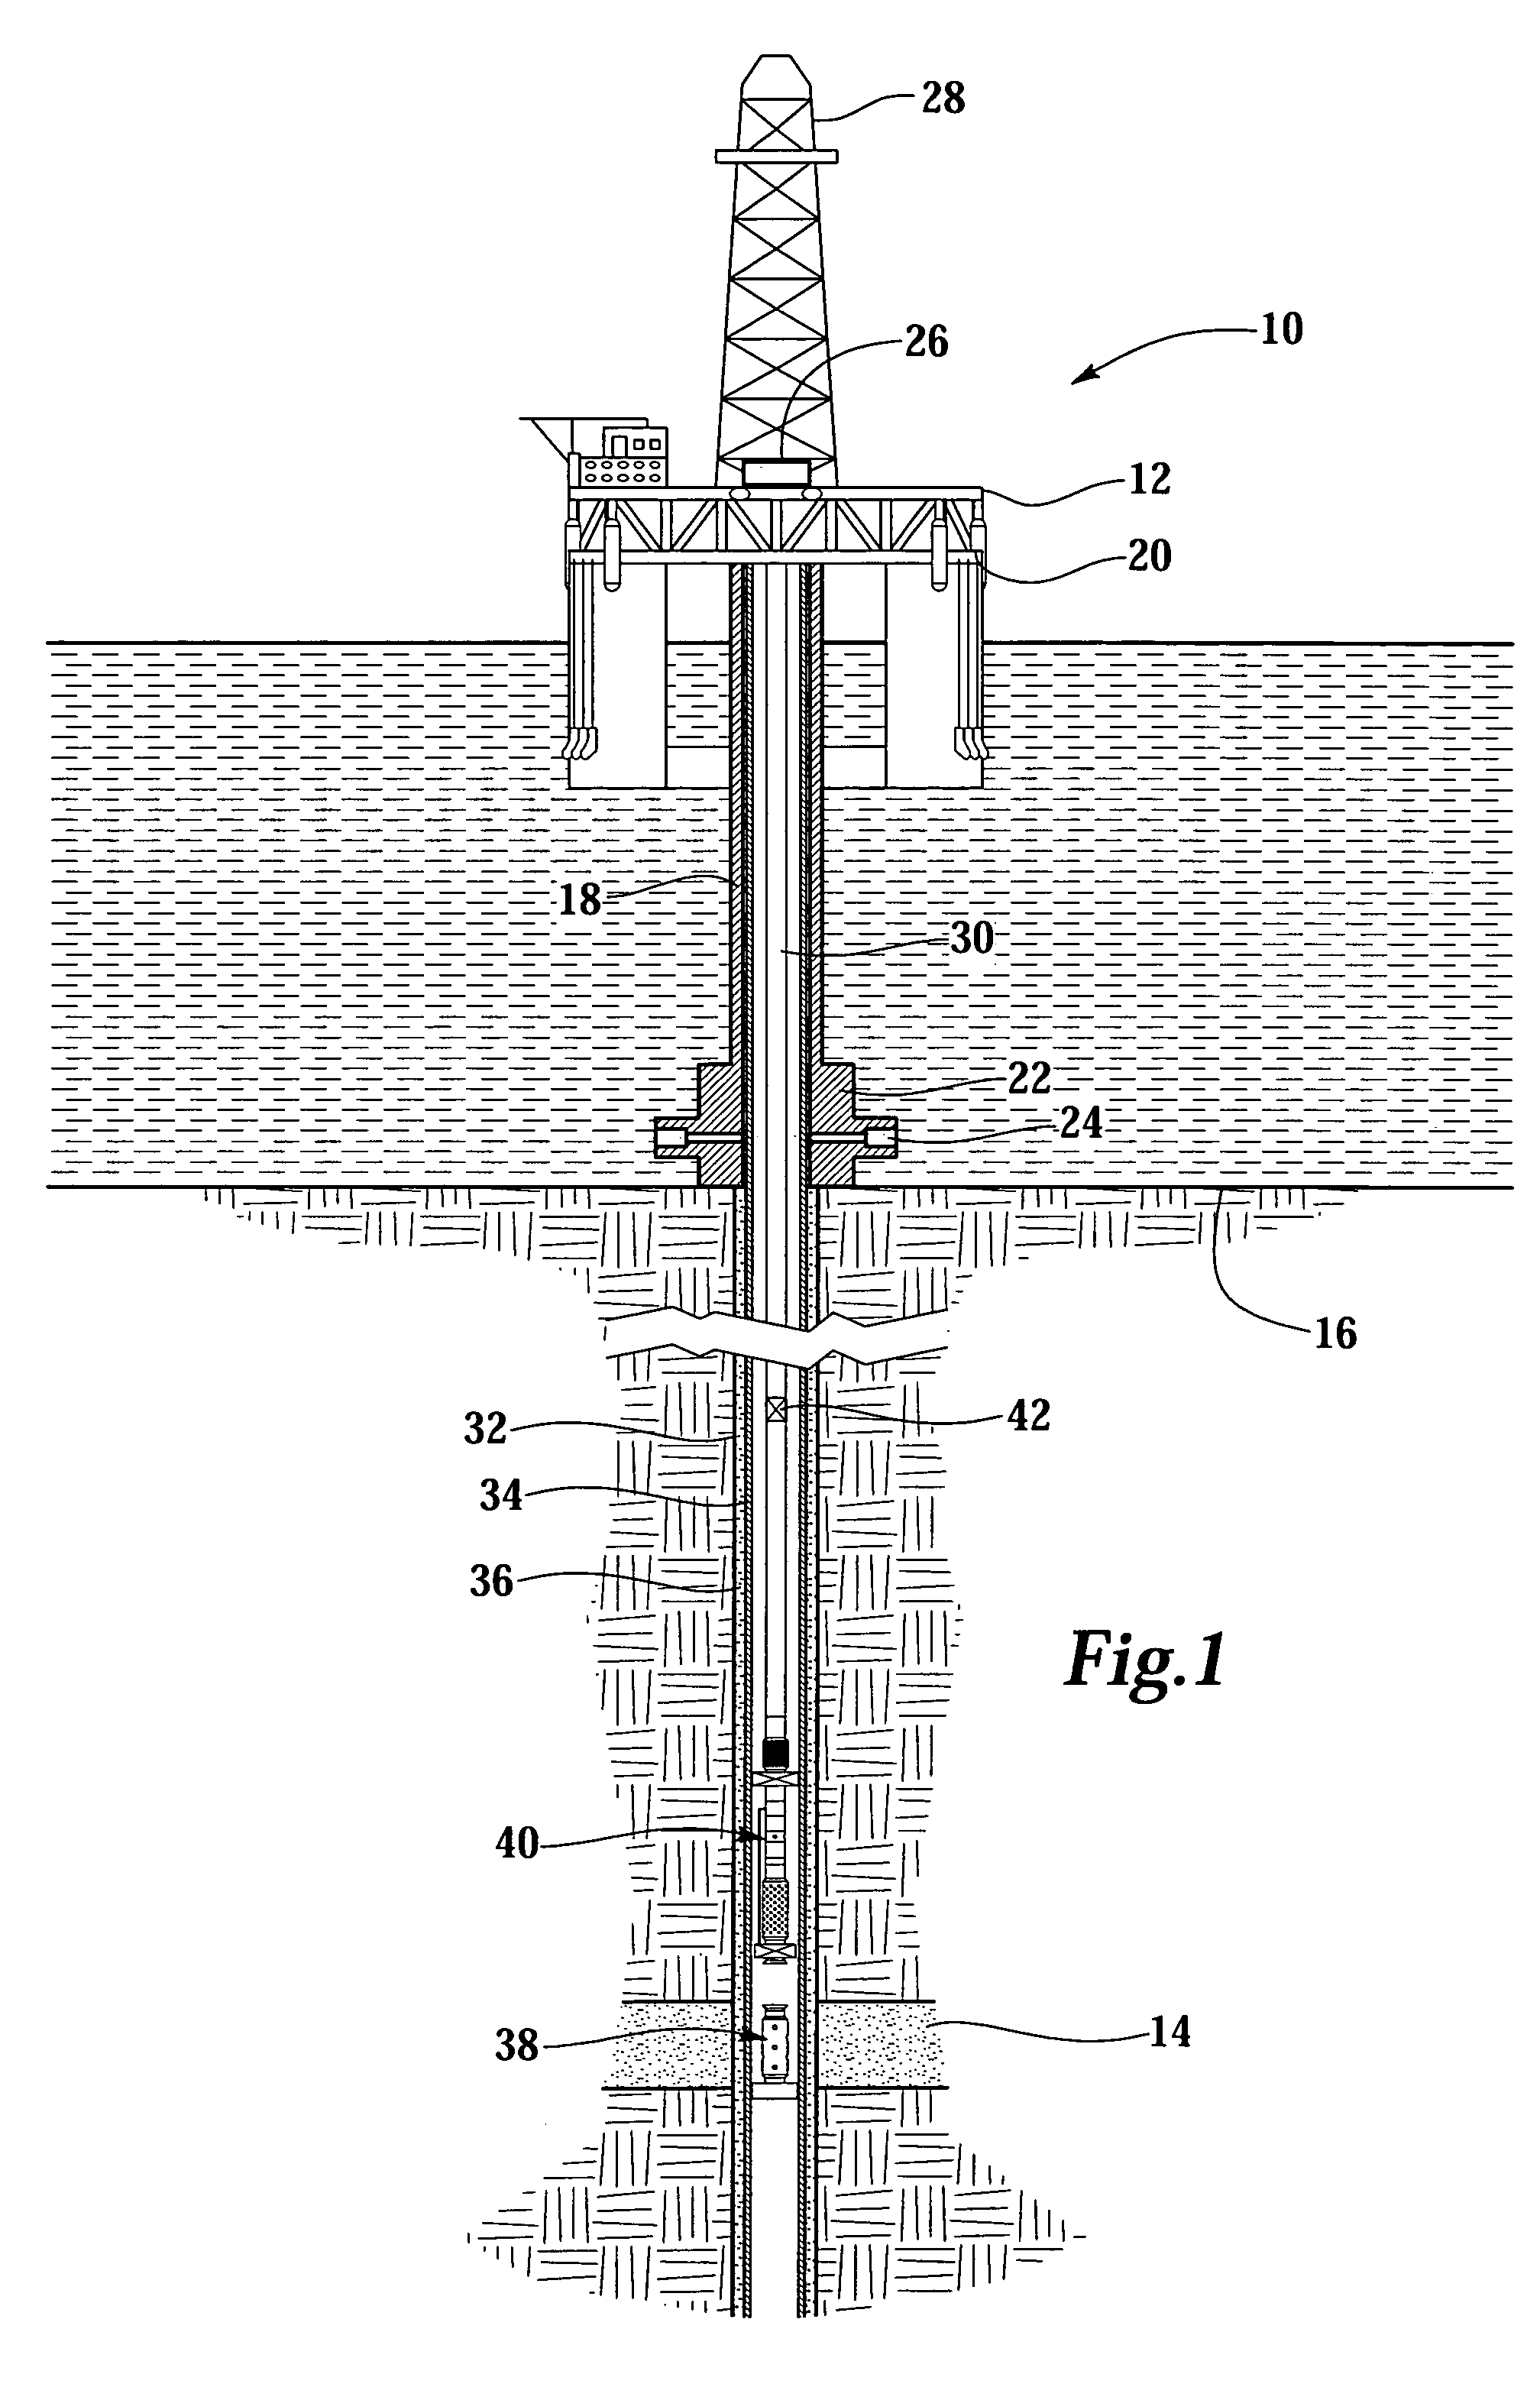 Downhole completion system and method for completing a well